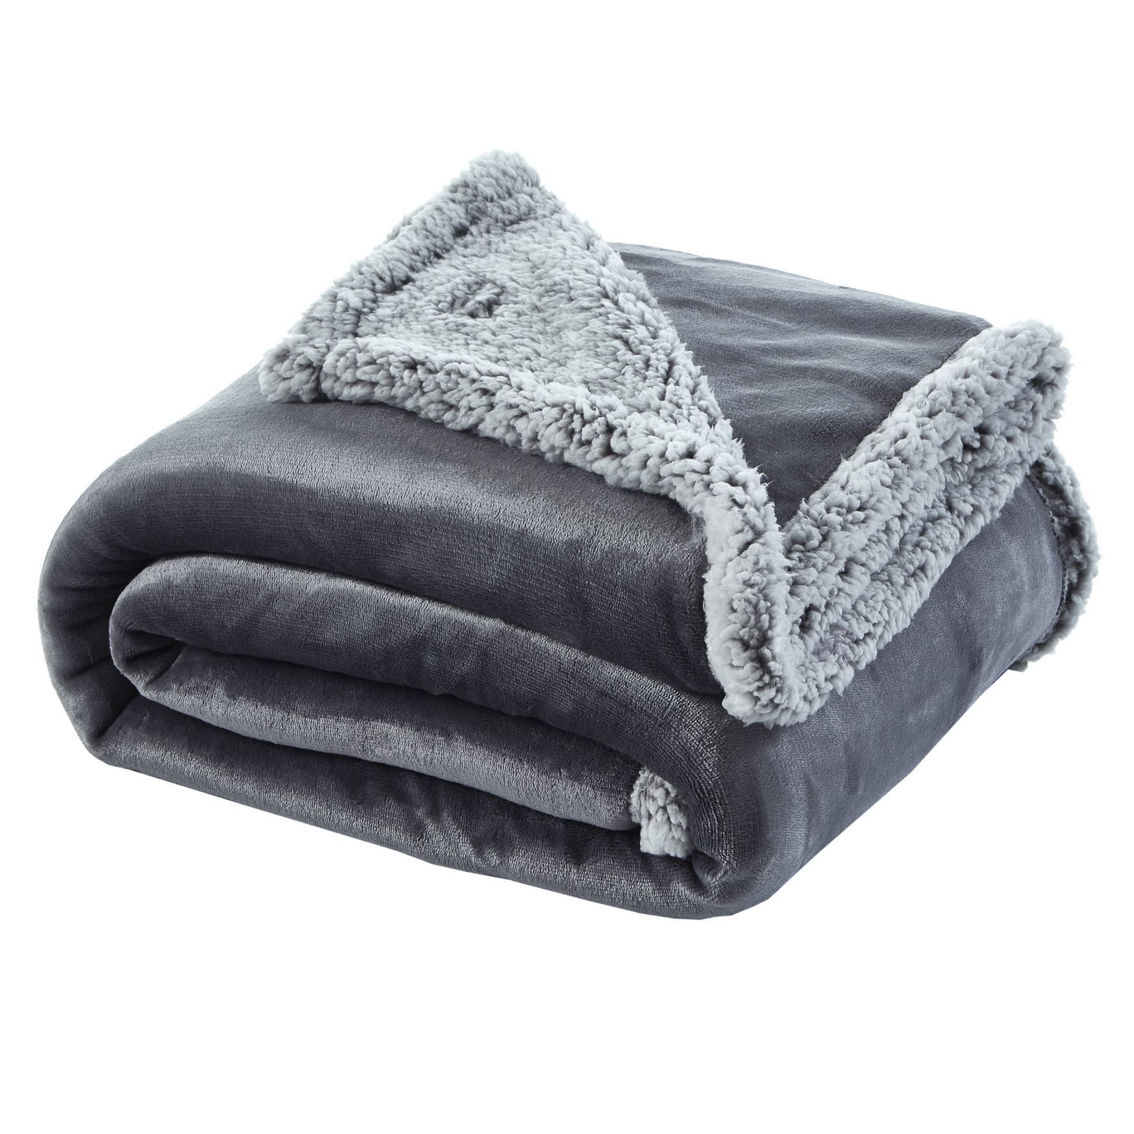 Cozy Tyme Urima Flannel Reversible Heathered Sherpa Throw, 50